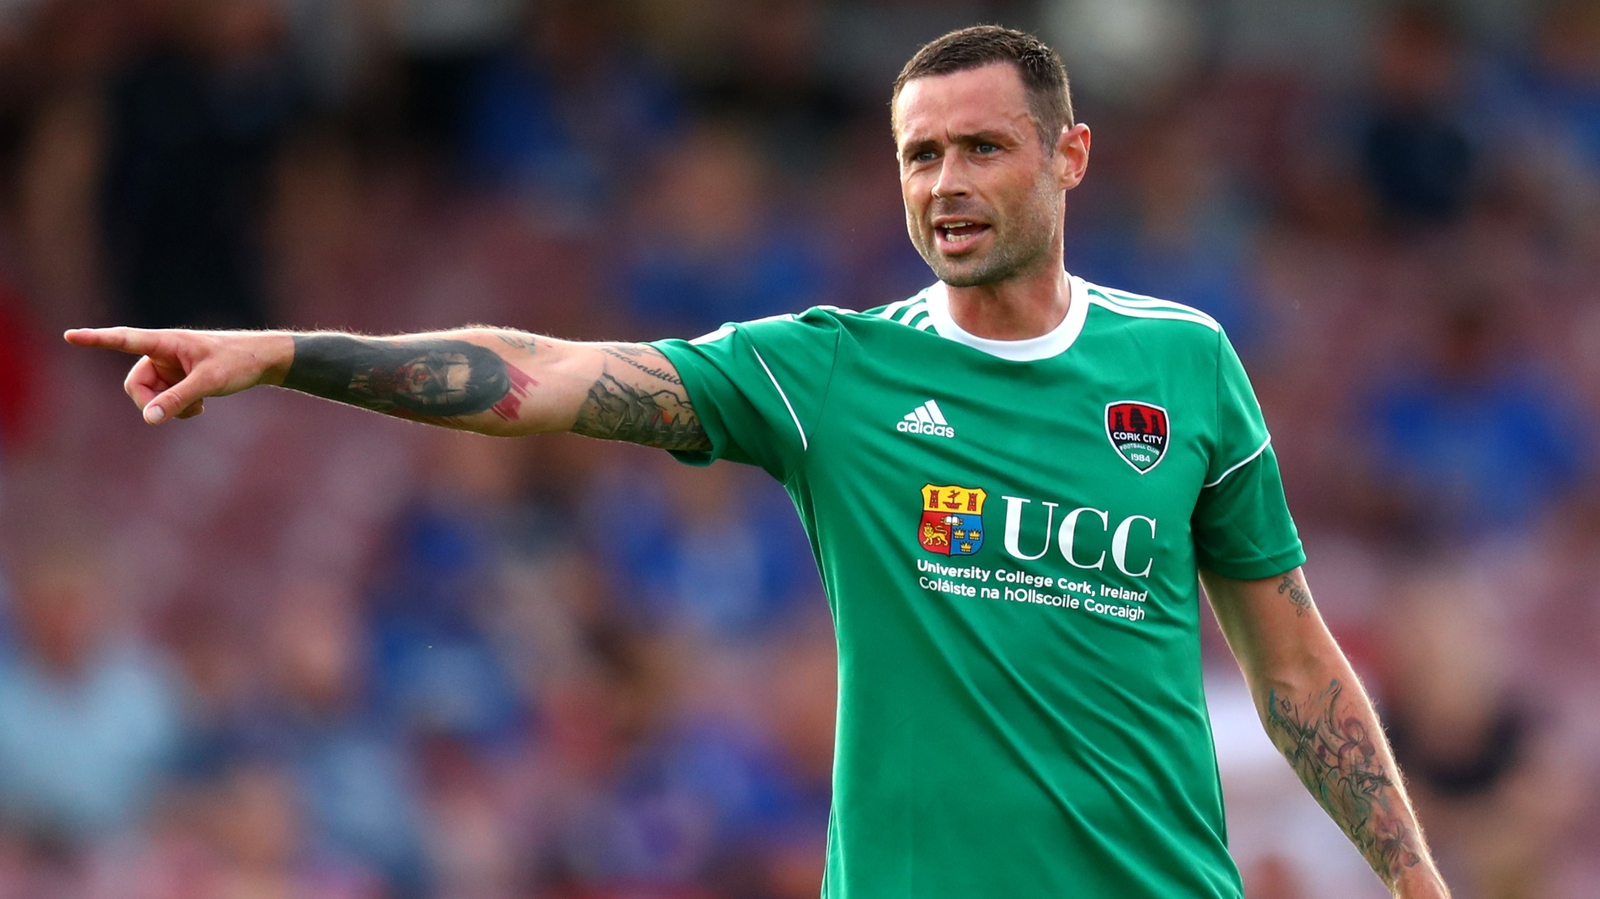 Damien Delaney joins Waterford for 2019 season